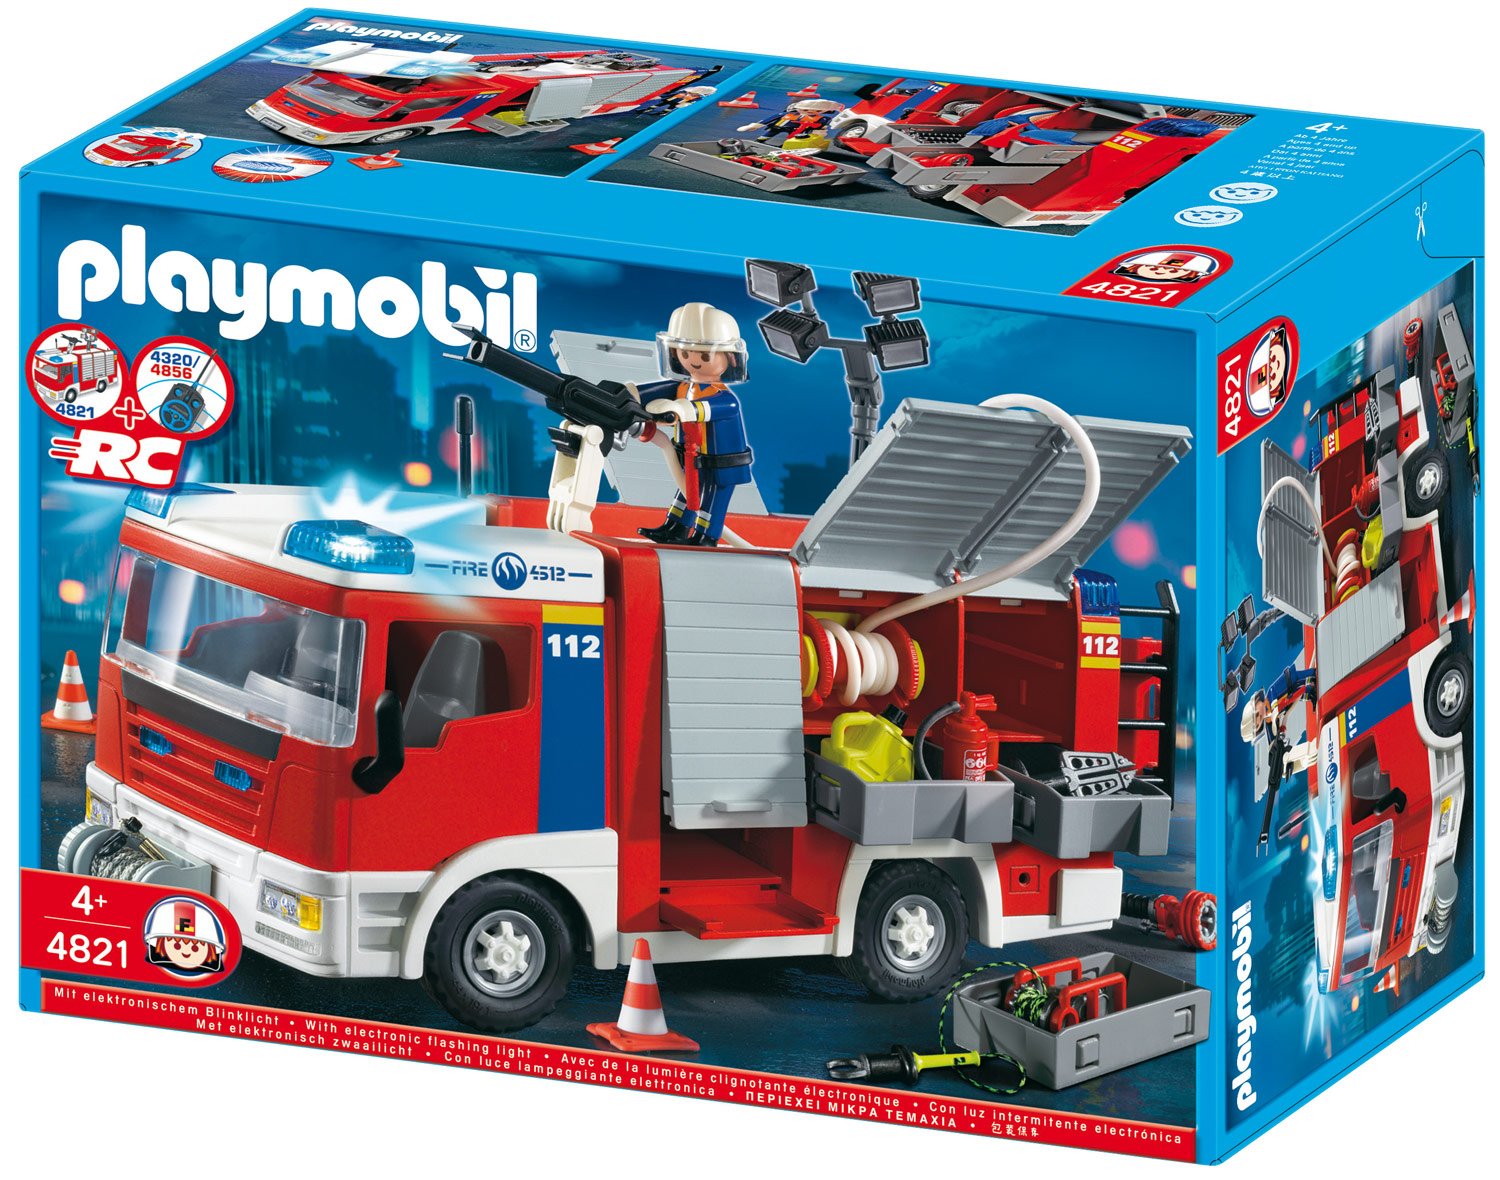 Playmobil City Action Fire Engine